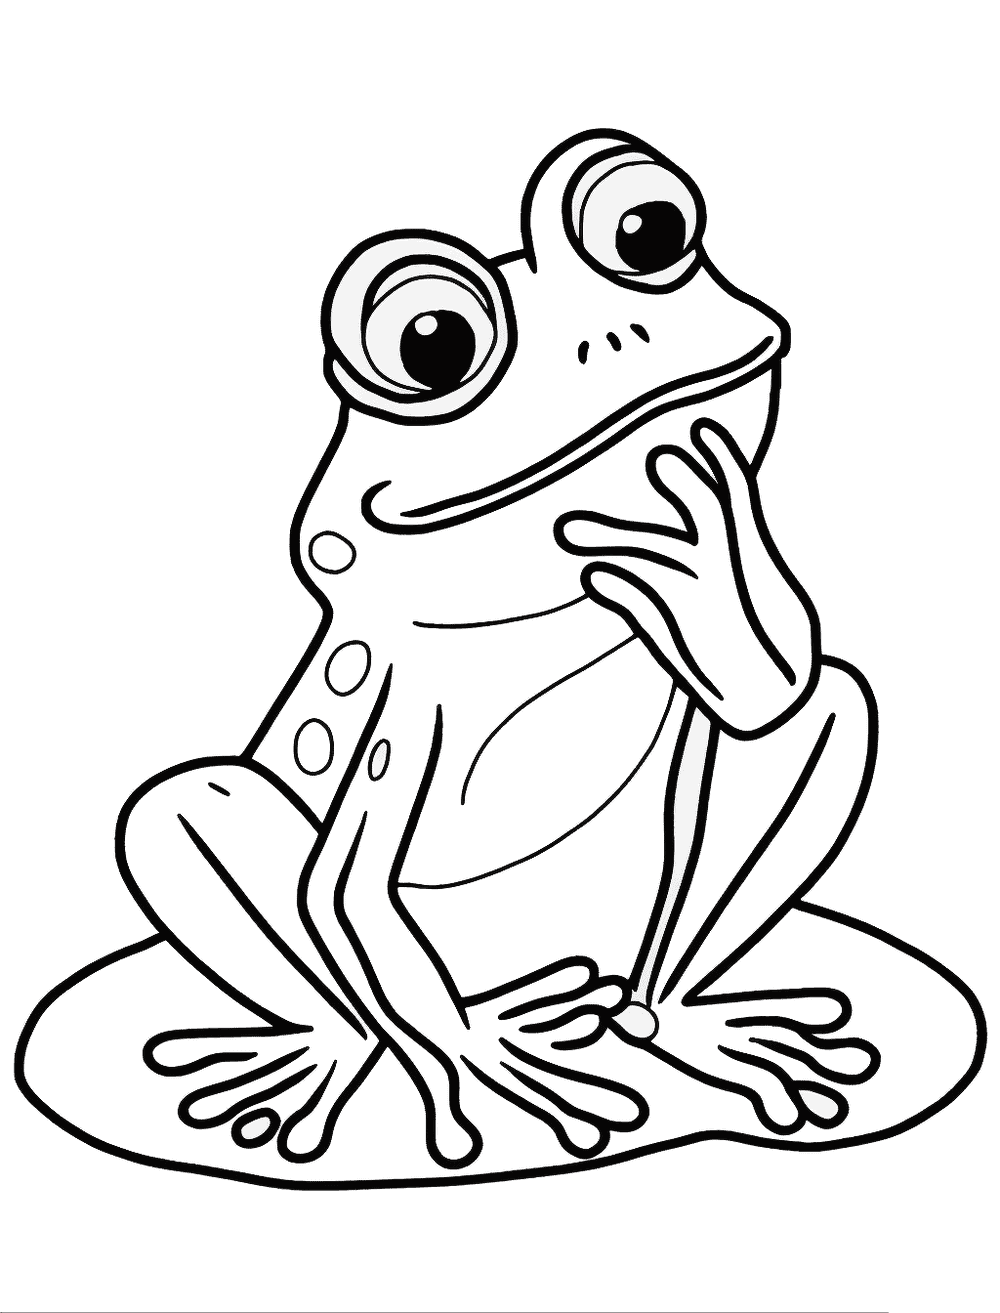 Pepe Frog Coloring Page - A frog in the style of Pepe with his finger to his chin thinking.